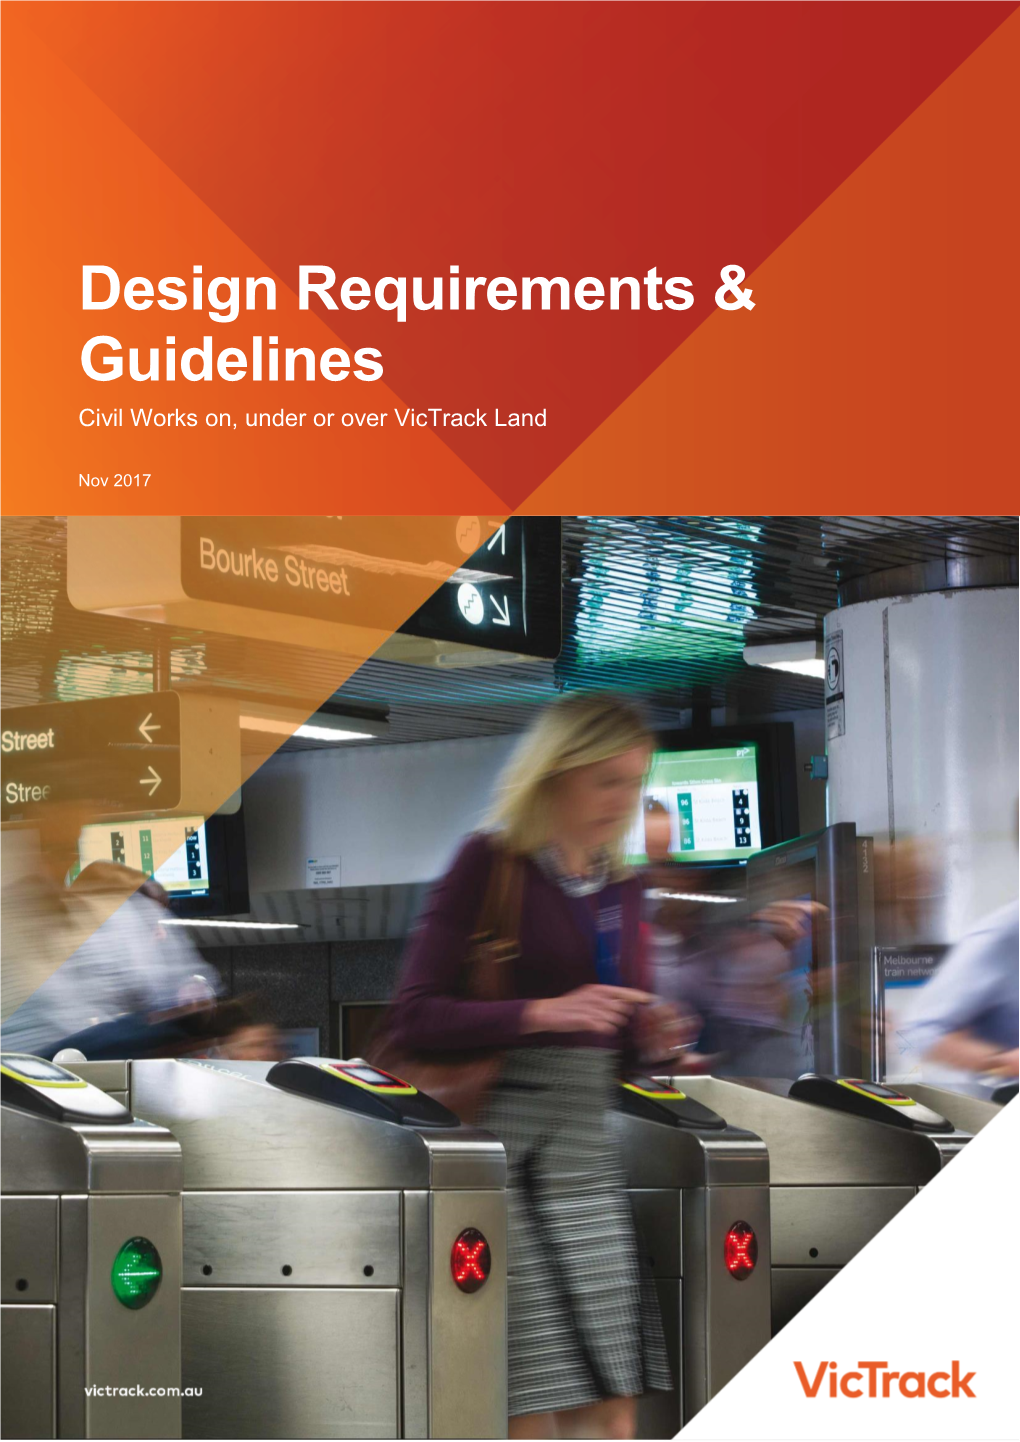 Design Requirements & Guidelines